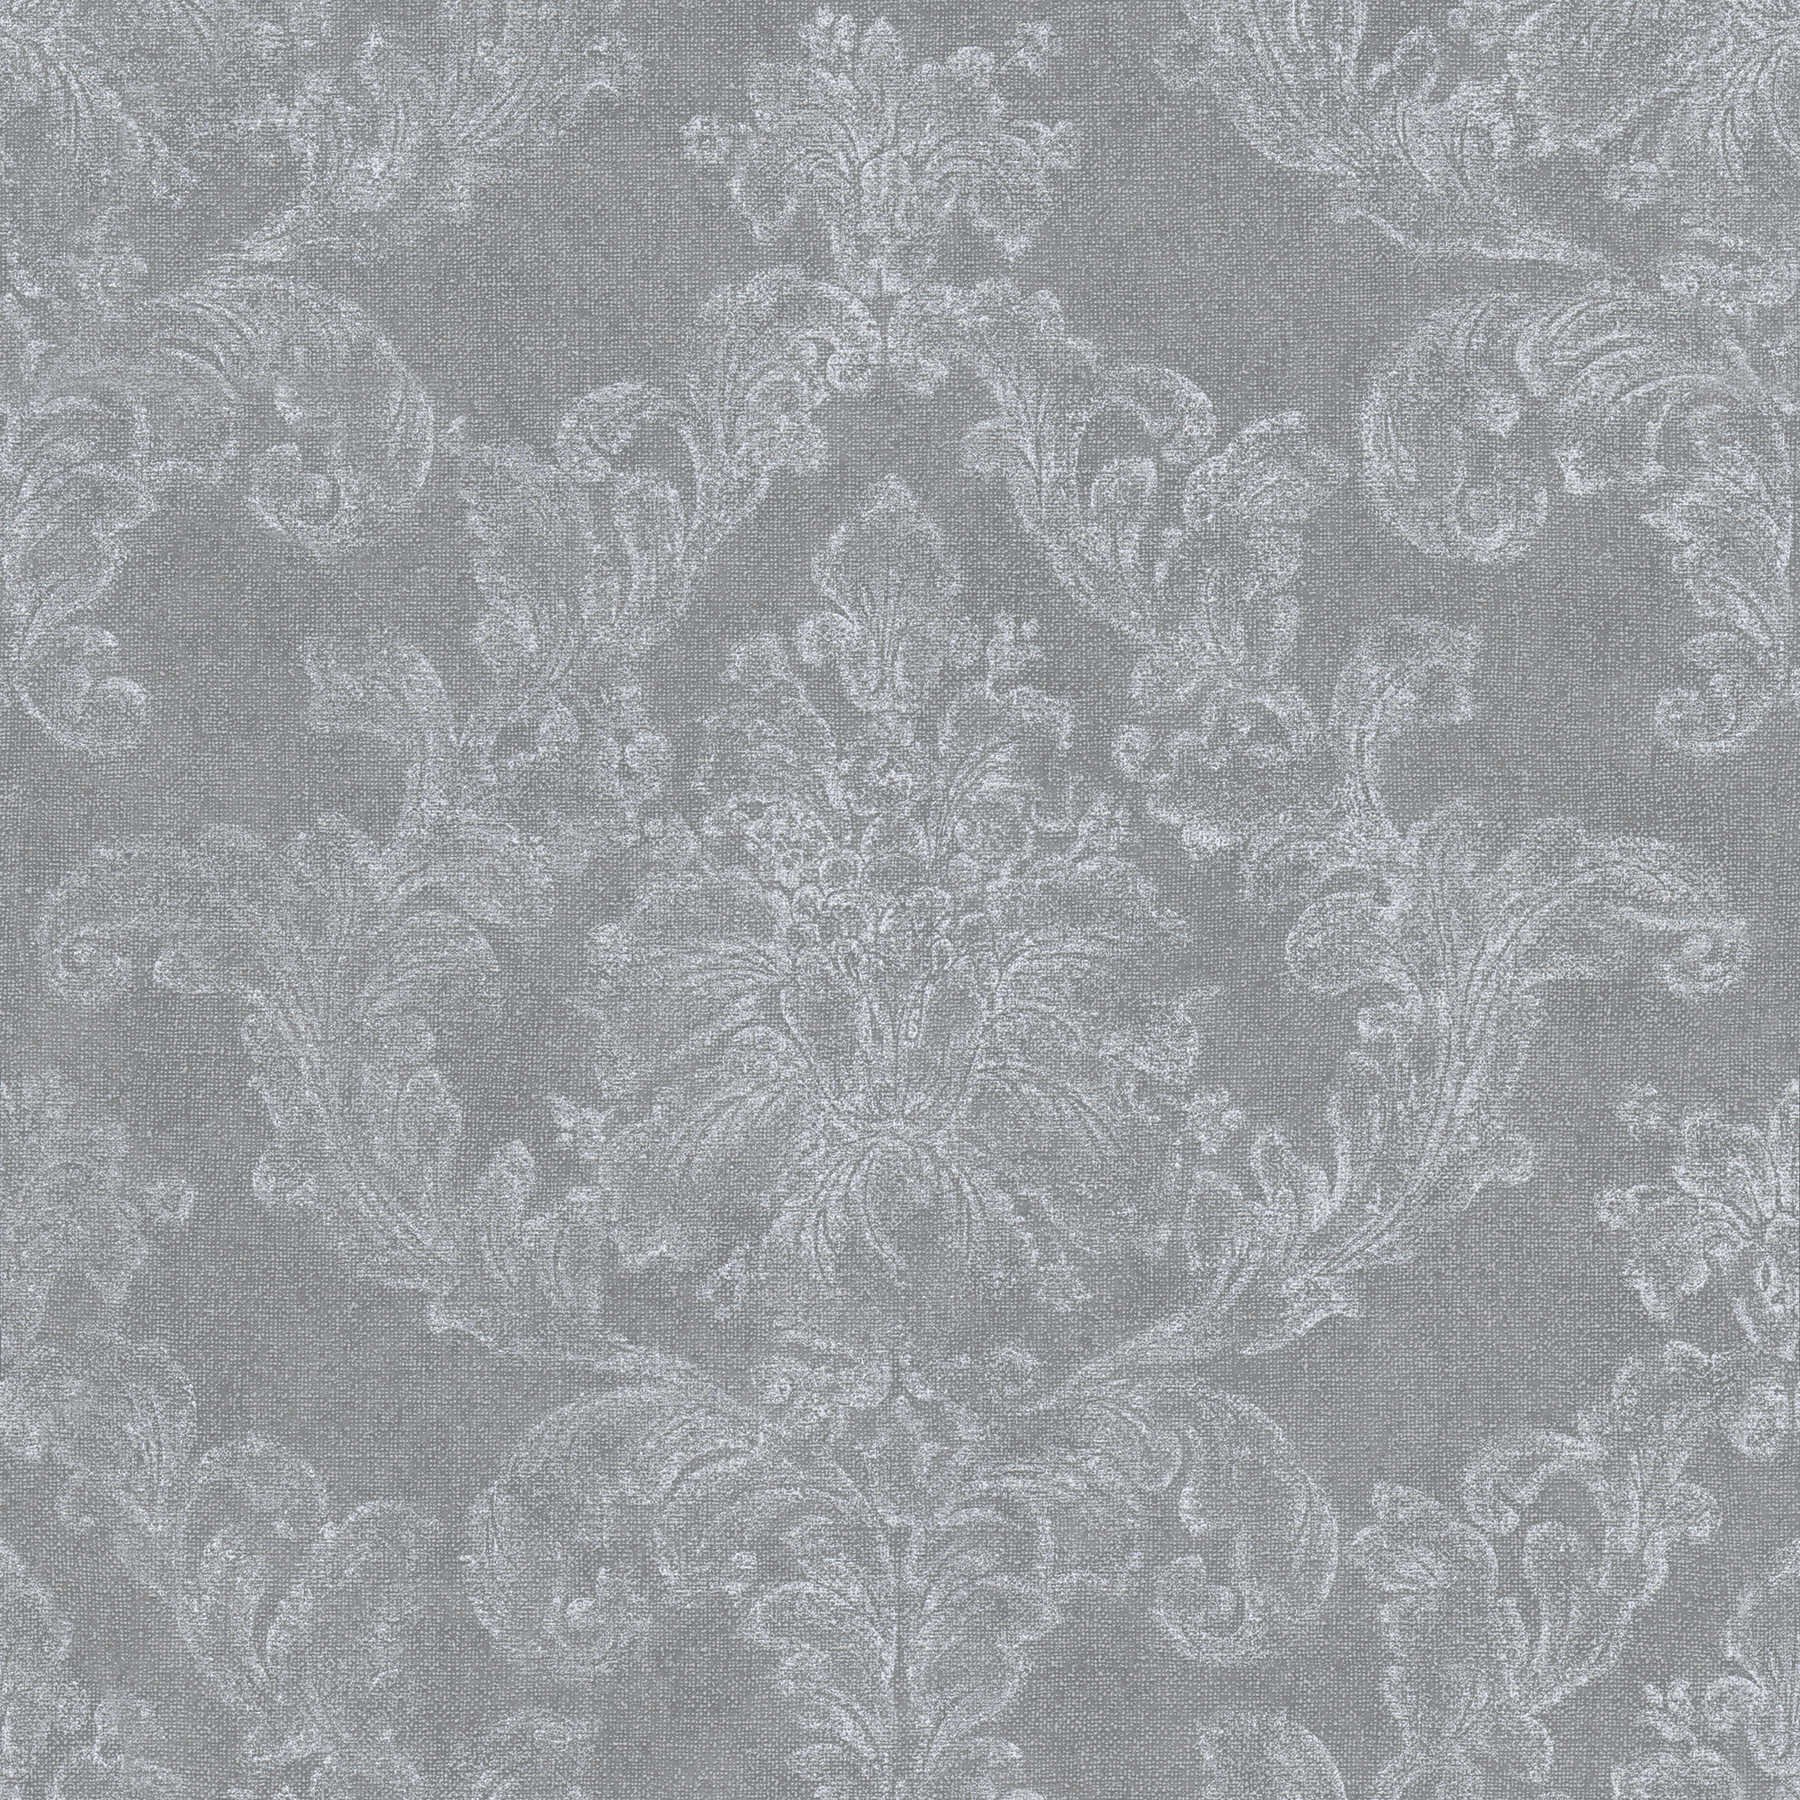 Ornament wallpaper in country style with textile look - grey, white
